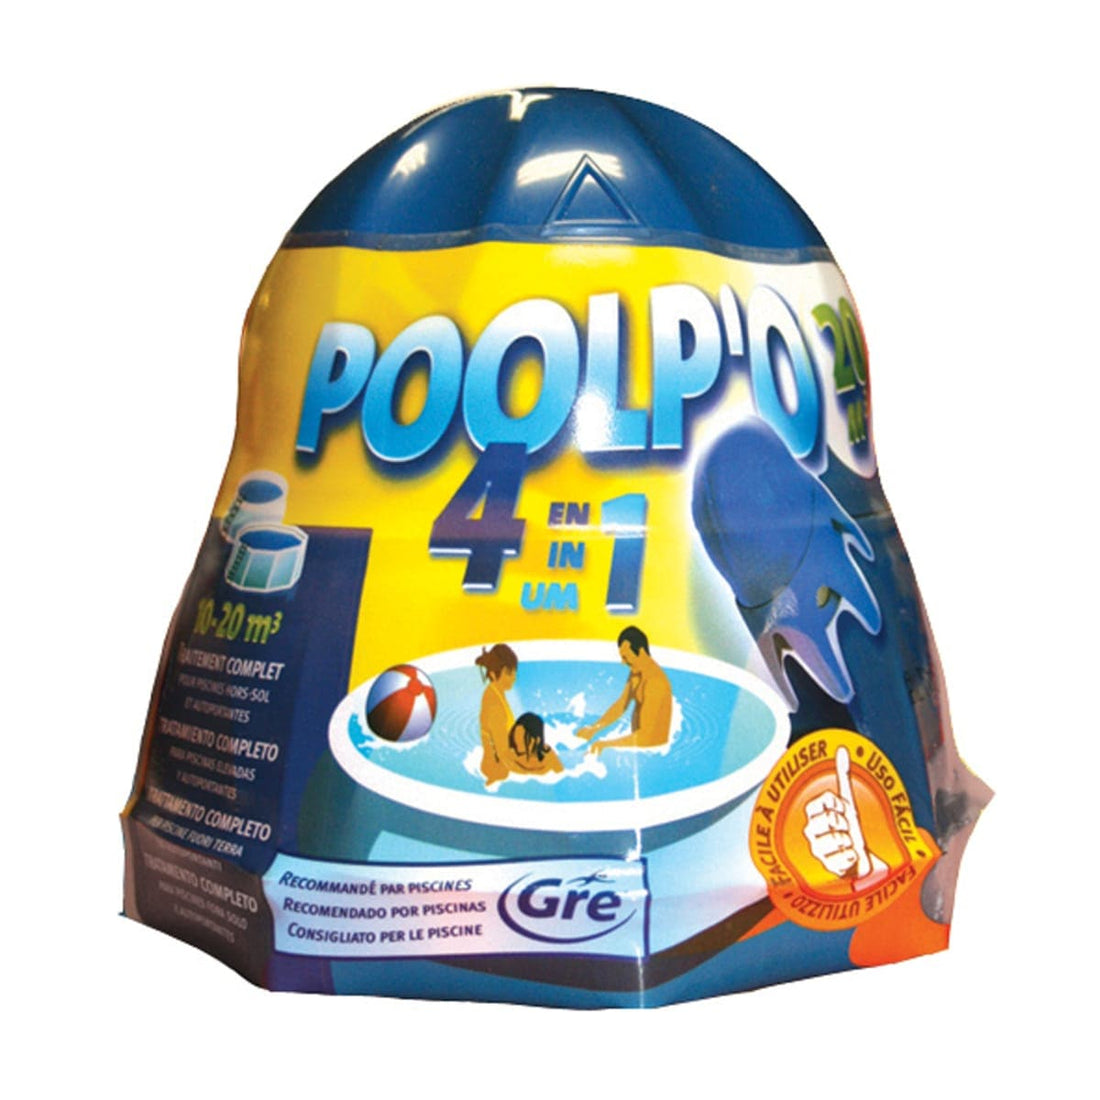 POOLPO 4 IN 1 FOR POOLS FROM 10 TO 20M3 - best price from Maltashopper.com BR500011617